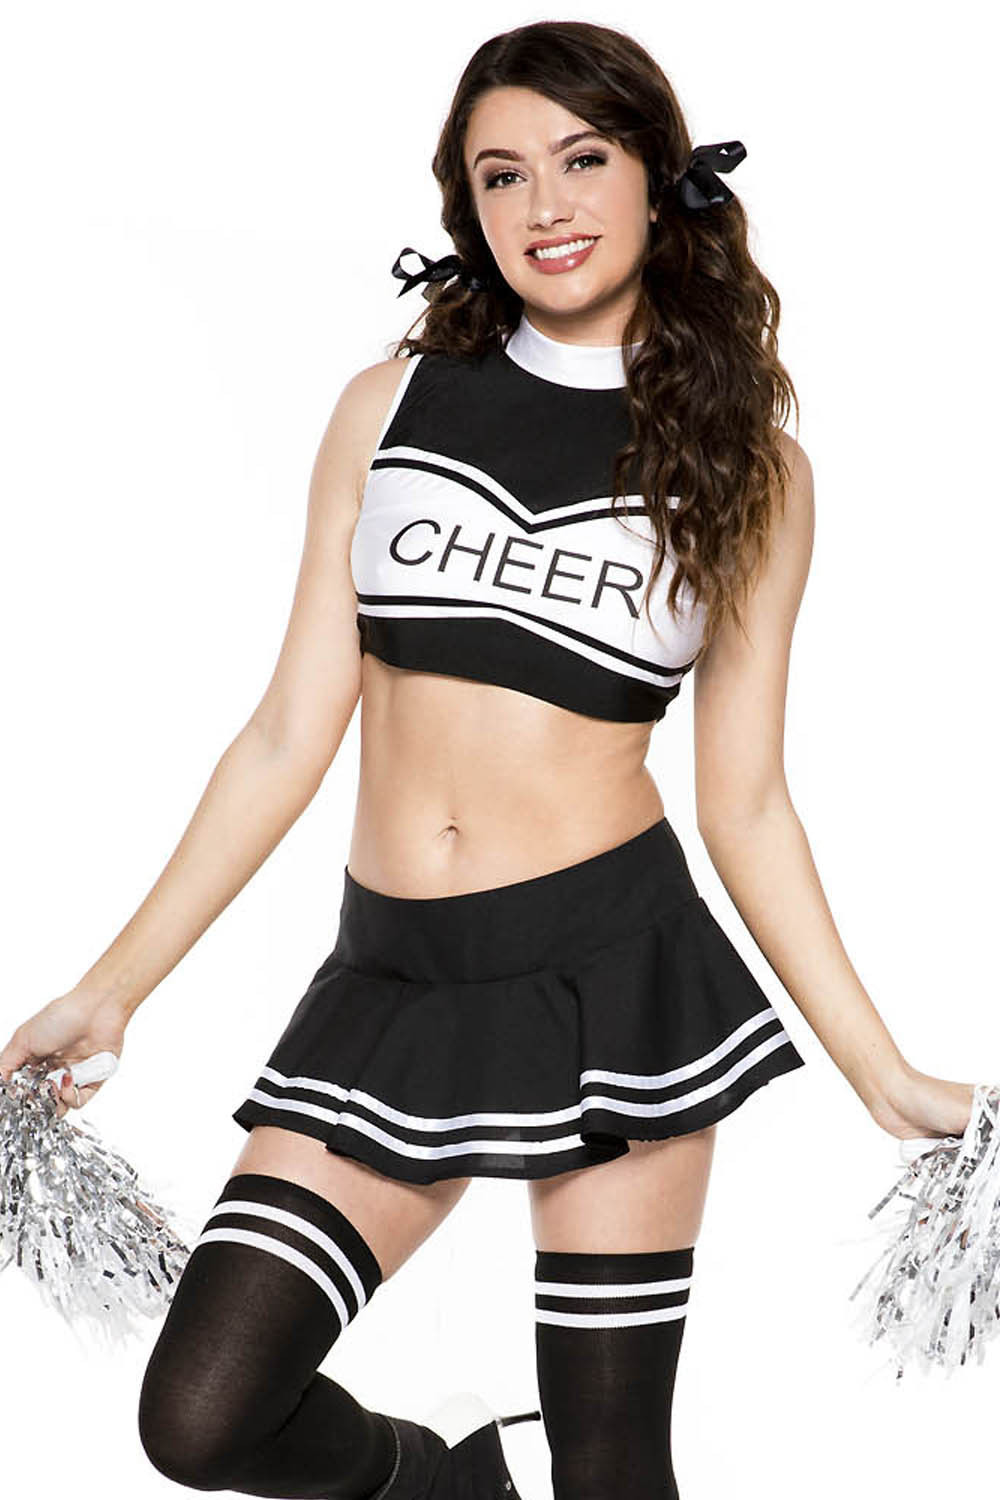 Cheer Outfit - Girls tops & t-shirts